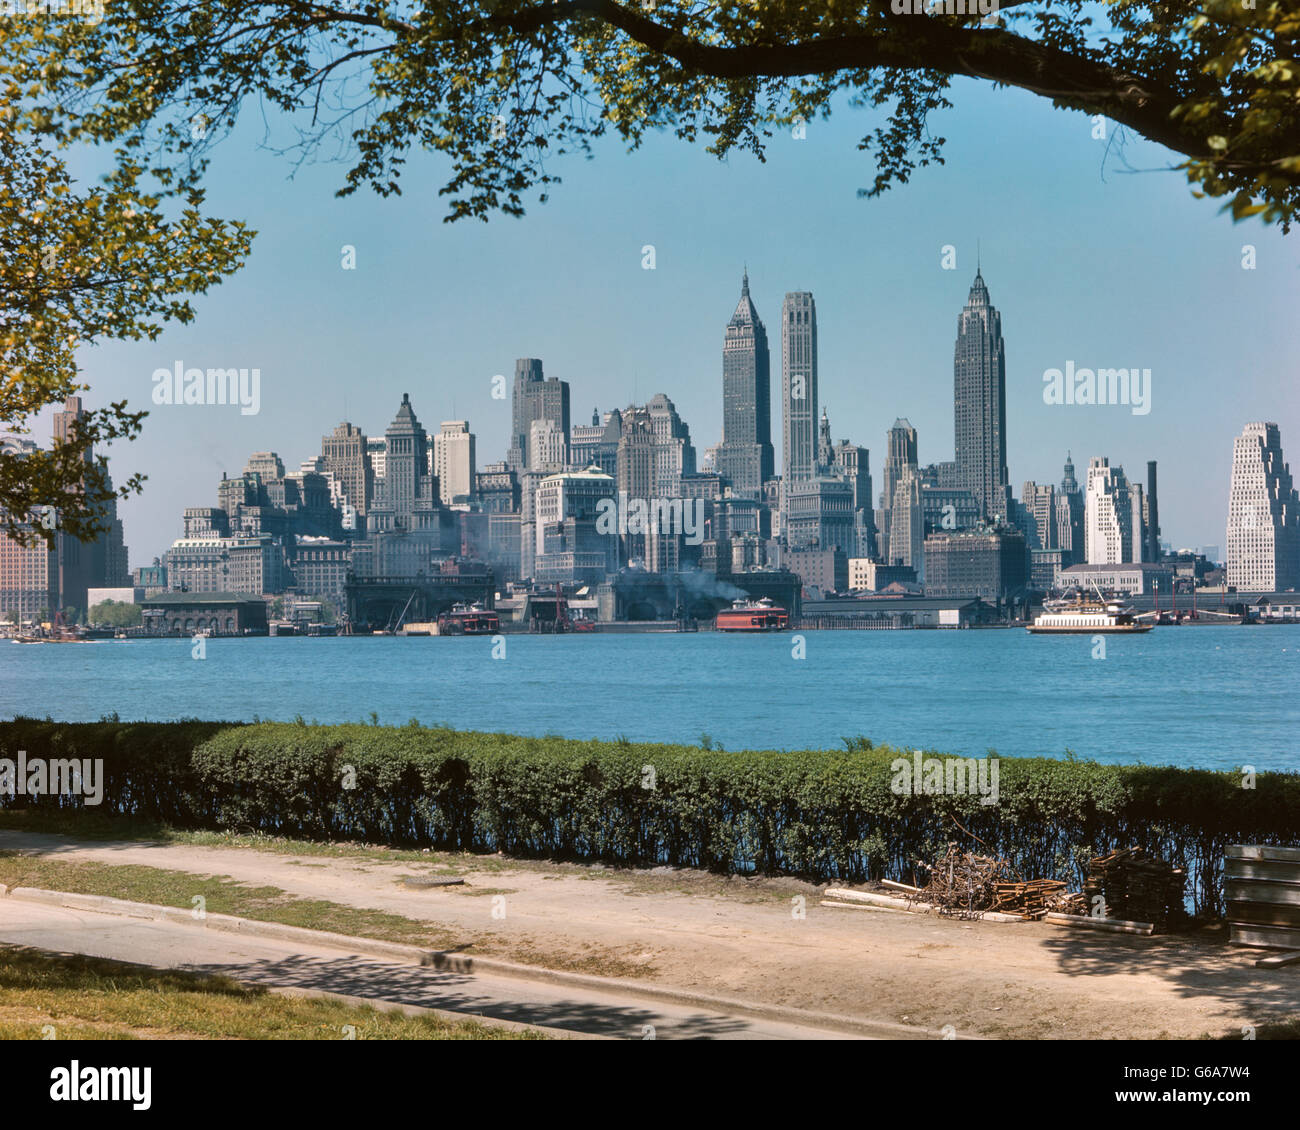 1950s SKYLINE OF DOWNTOWN MANHATTAN FROM GOVERNORS ISLAND IN THE HARBOR NYC USA Stock Photo